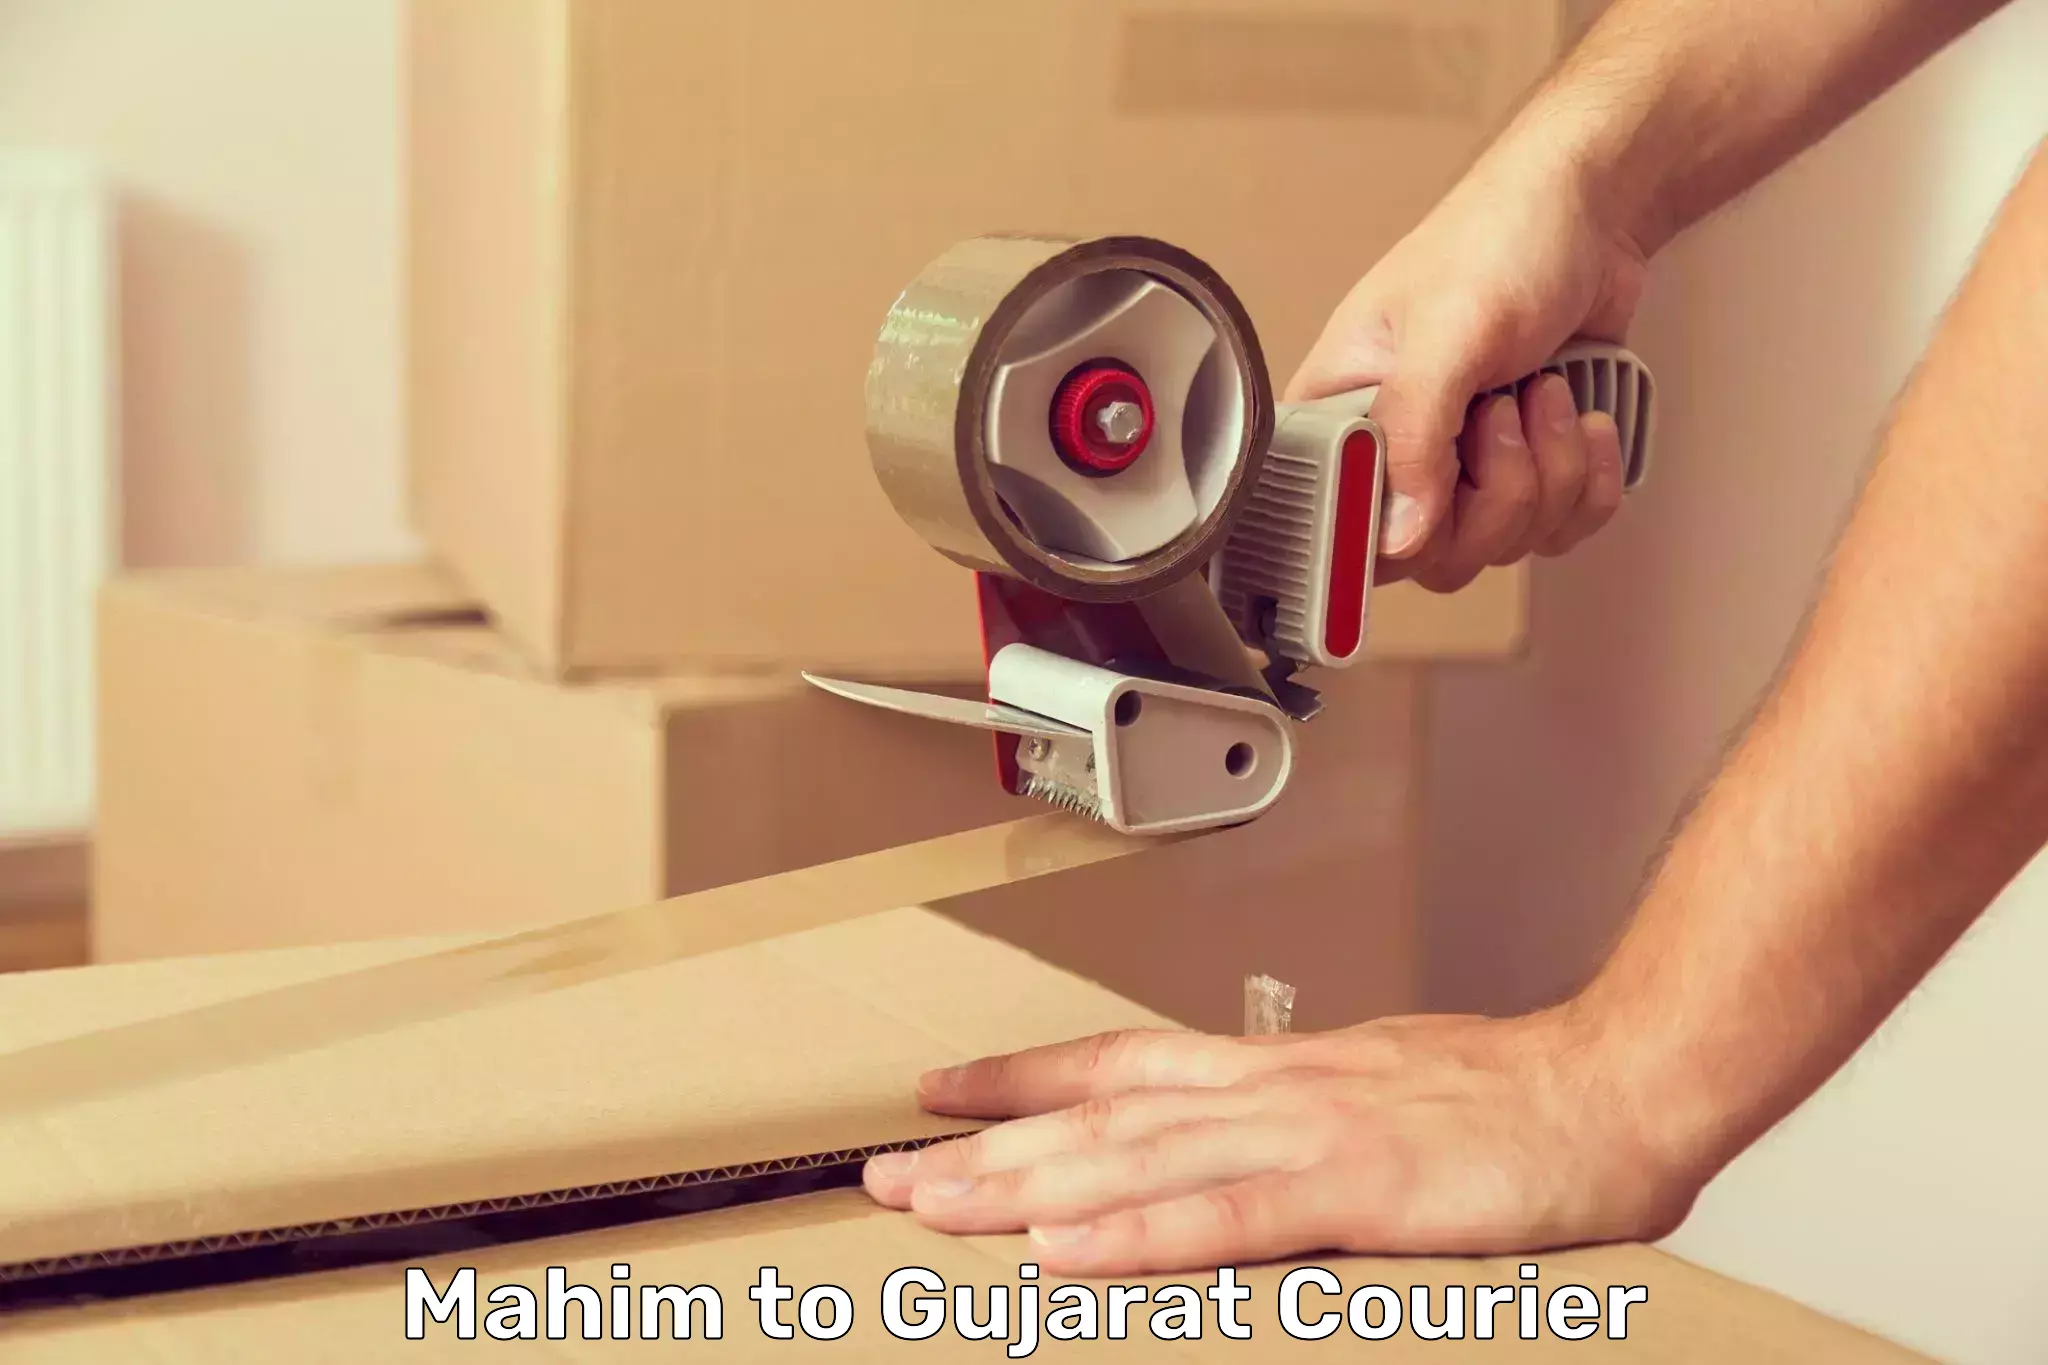 User-friendly delivery service Mahim to Gujarat